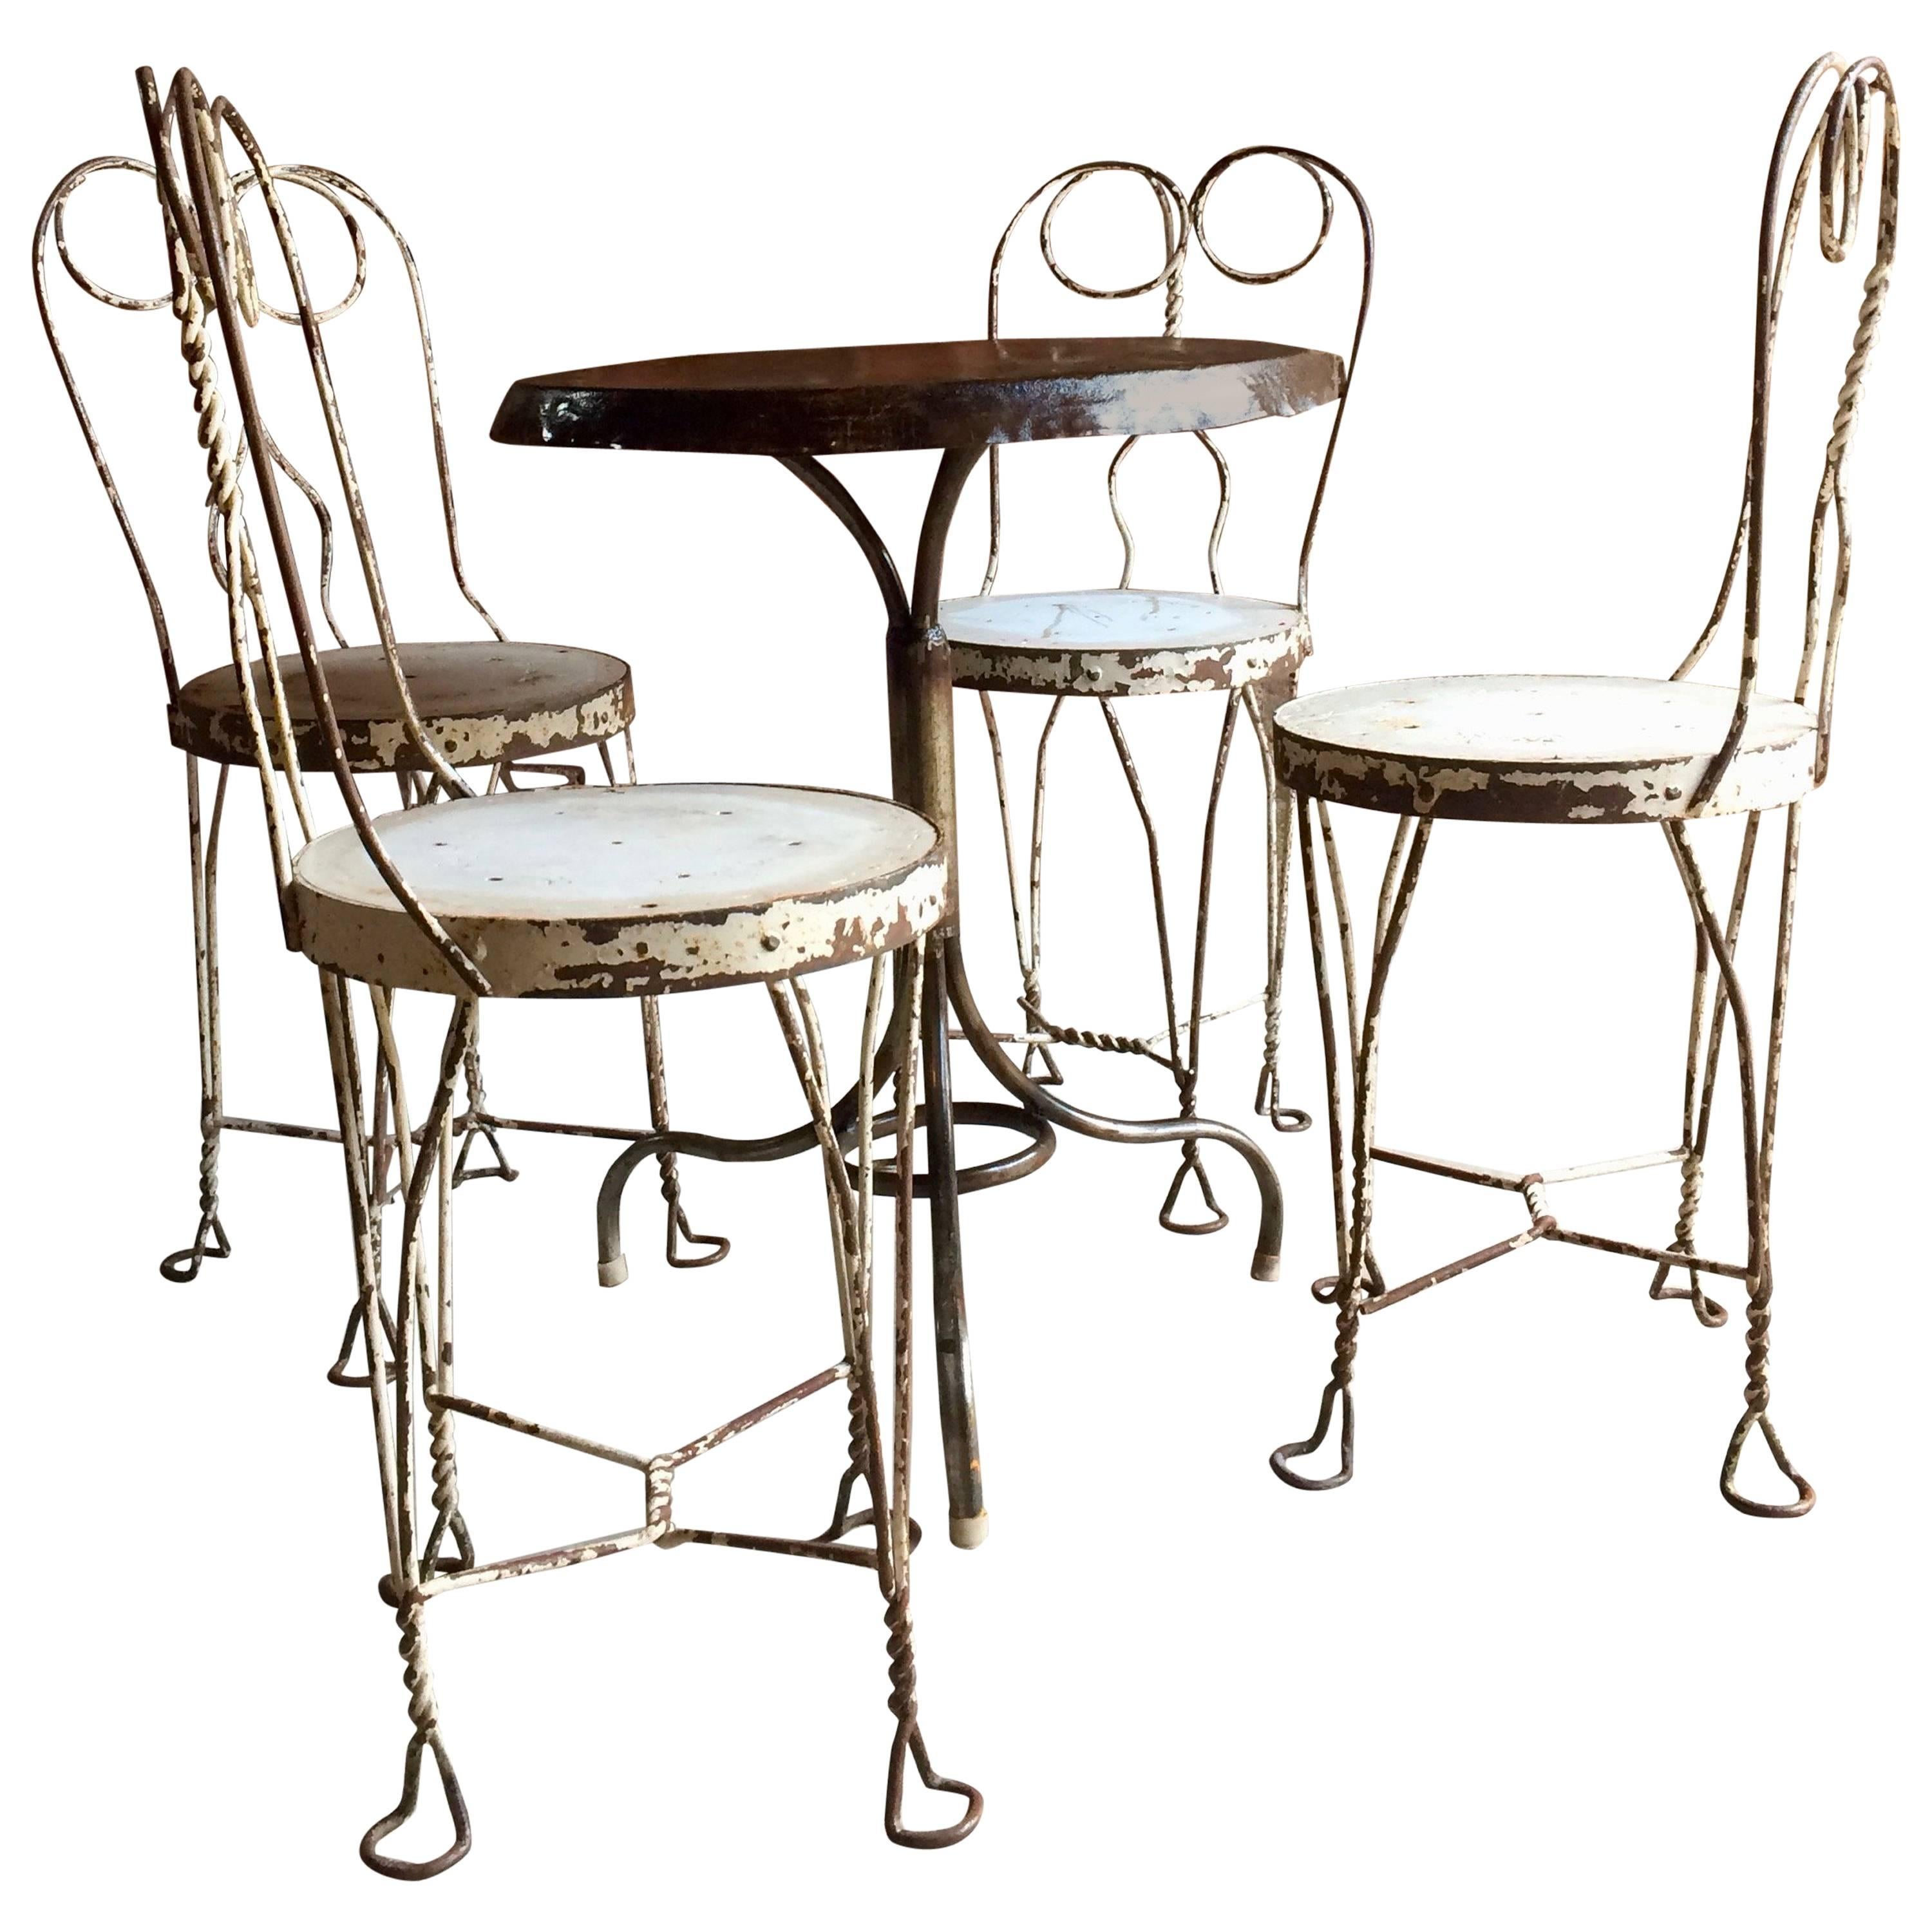 French Bistro Table and Four Chairs Original Wrought Iron, circa 1920s